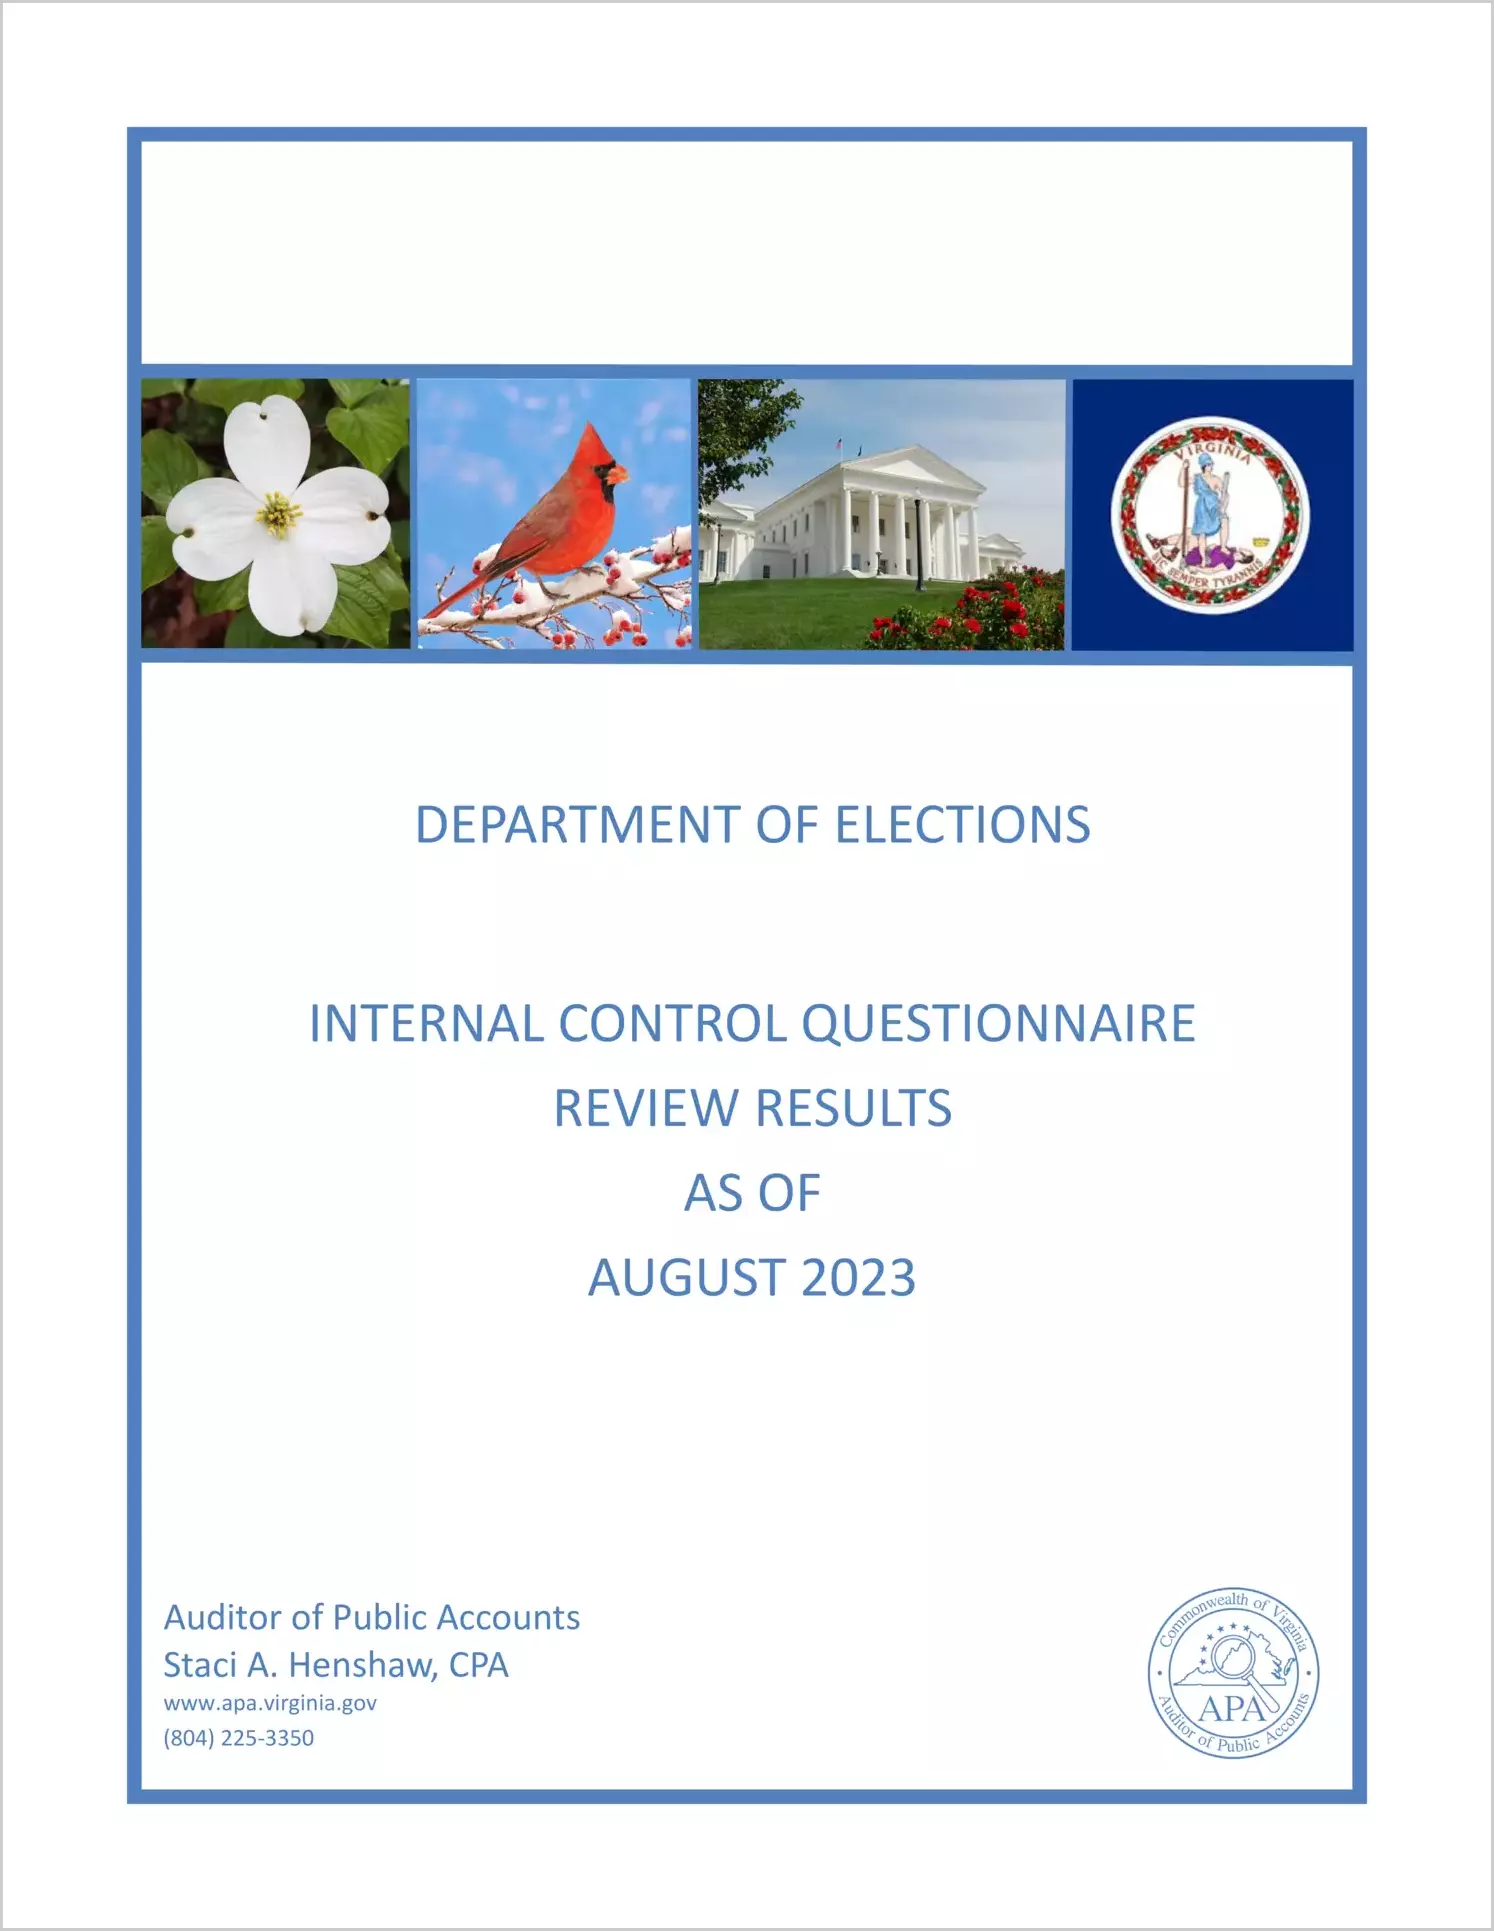 Department of Elections Internal Control Questionnaire Review Results as of August 2023